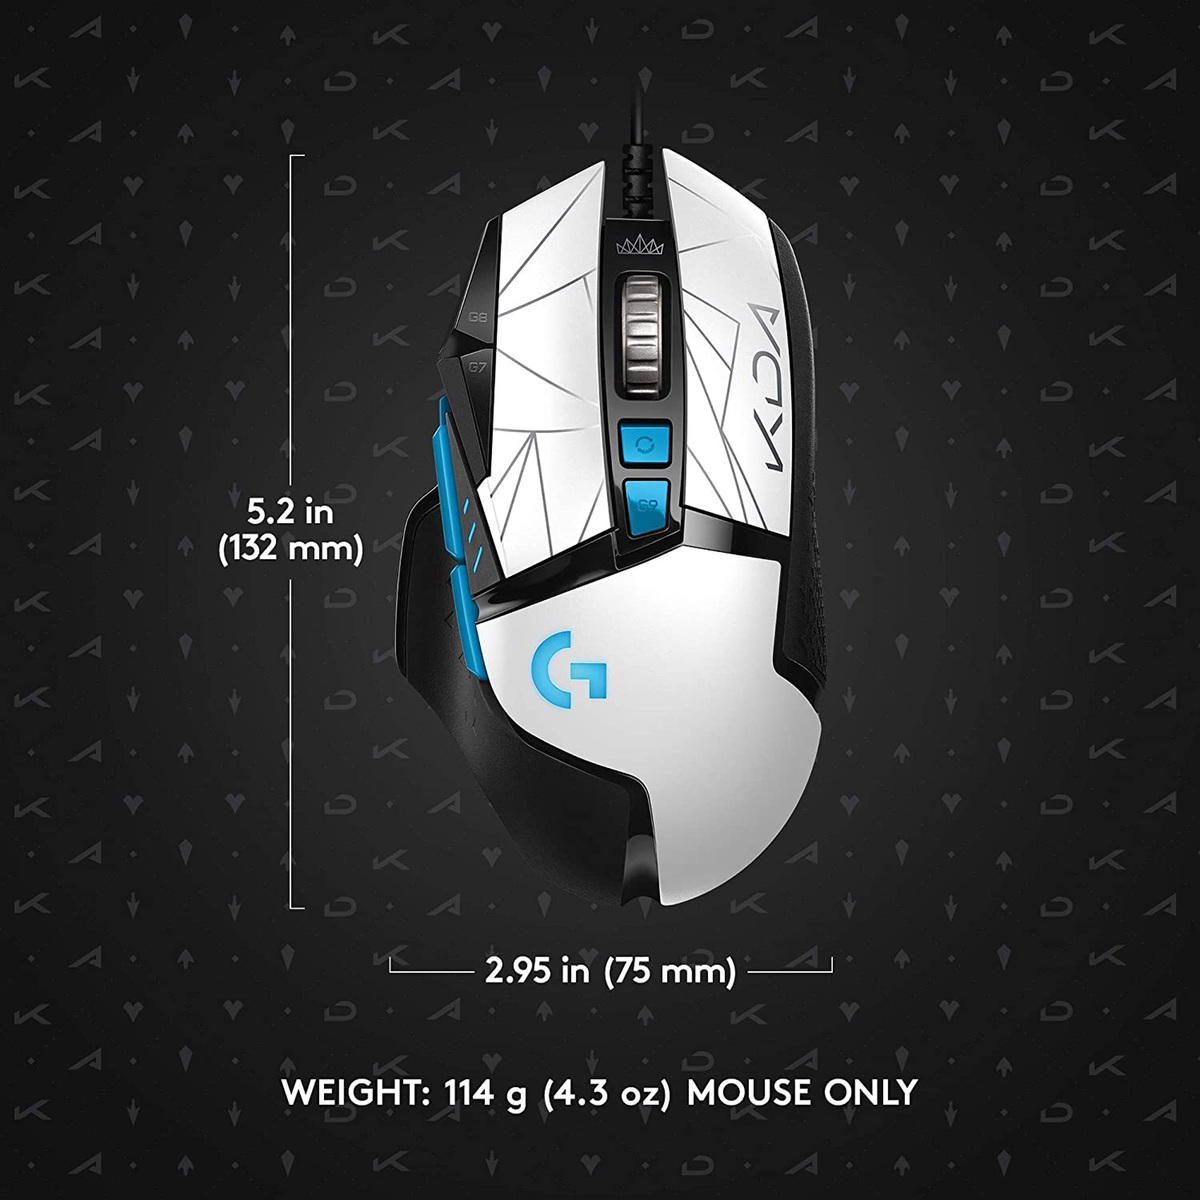  Buy Logitech G 502 USB Hero Gaming Mouse and Logitech G413  Mechanical Keyboard Online at Low Prices in India